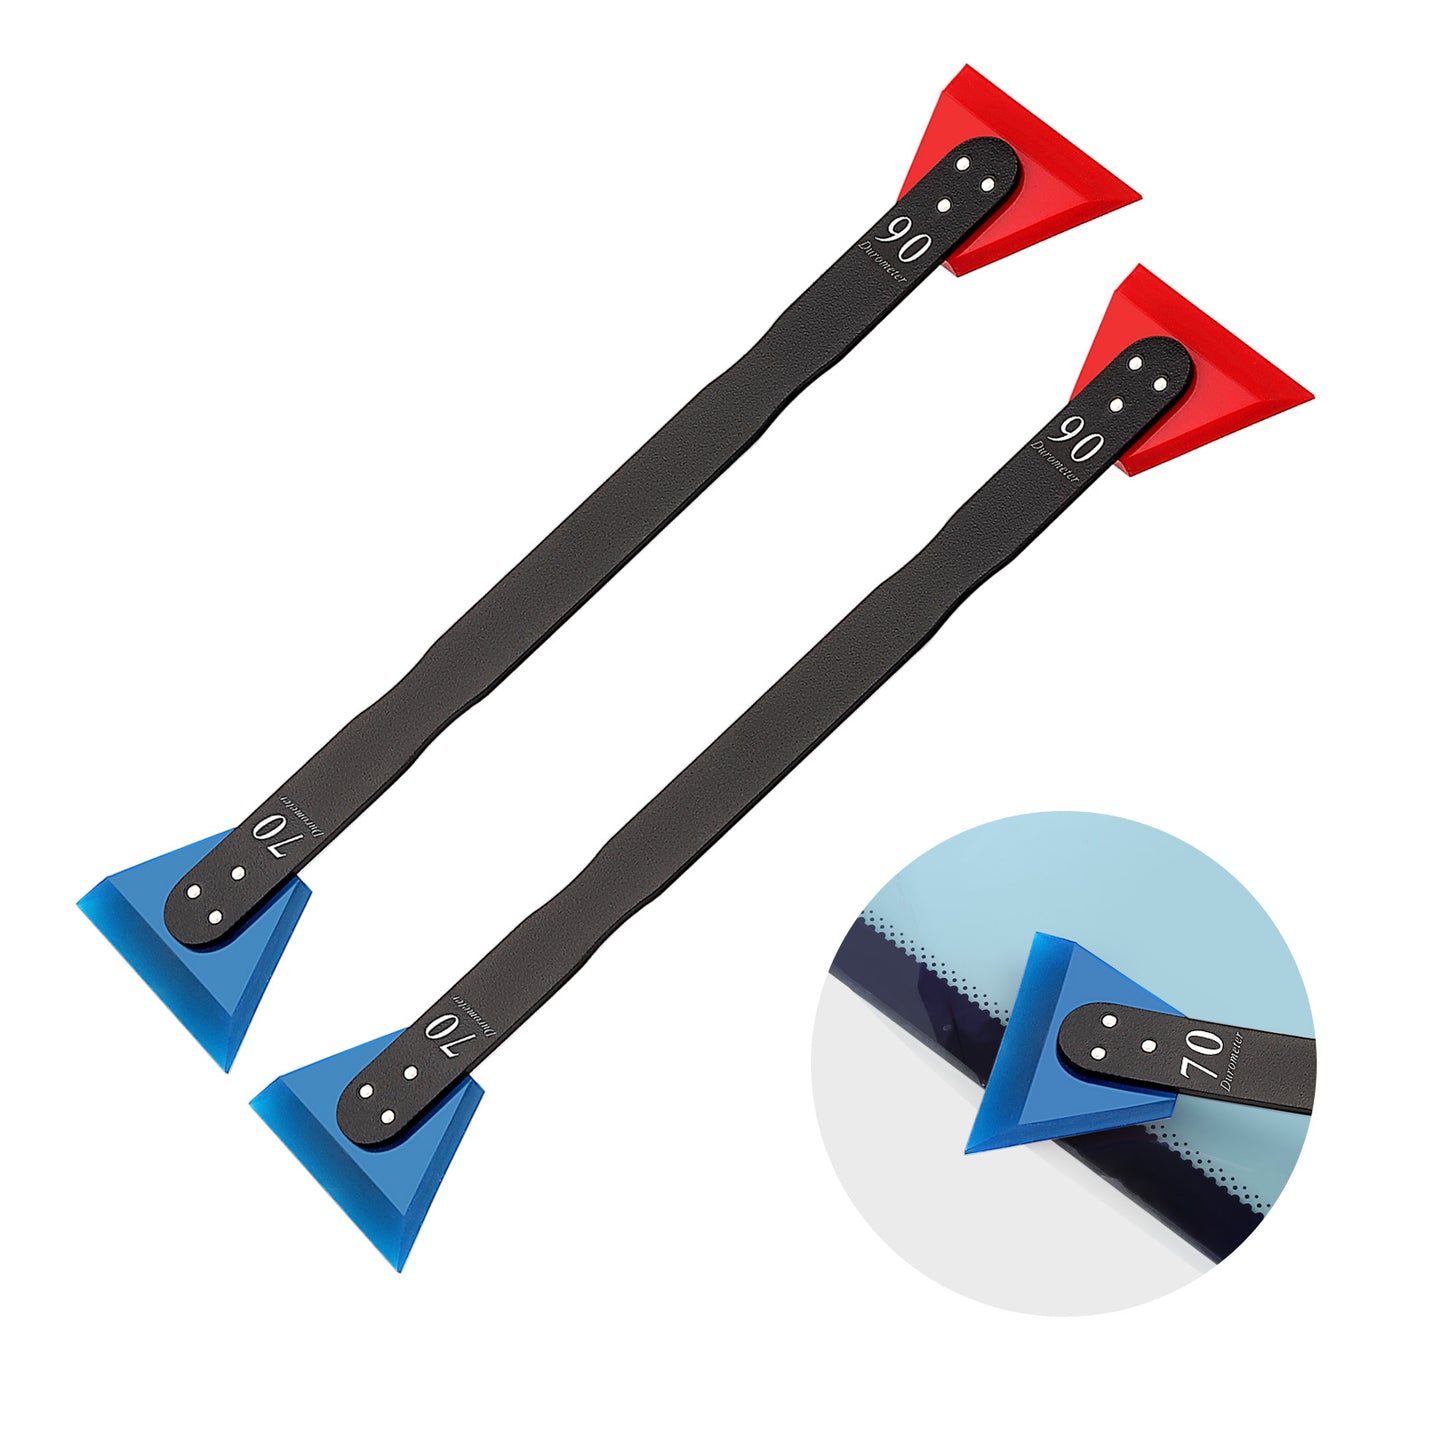 Dual Head Slim Squeegee displaying its dual-color blades, red for hard surfaces and blue for softer applications.